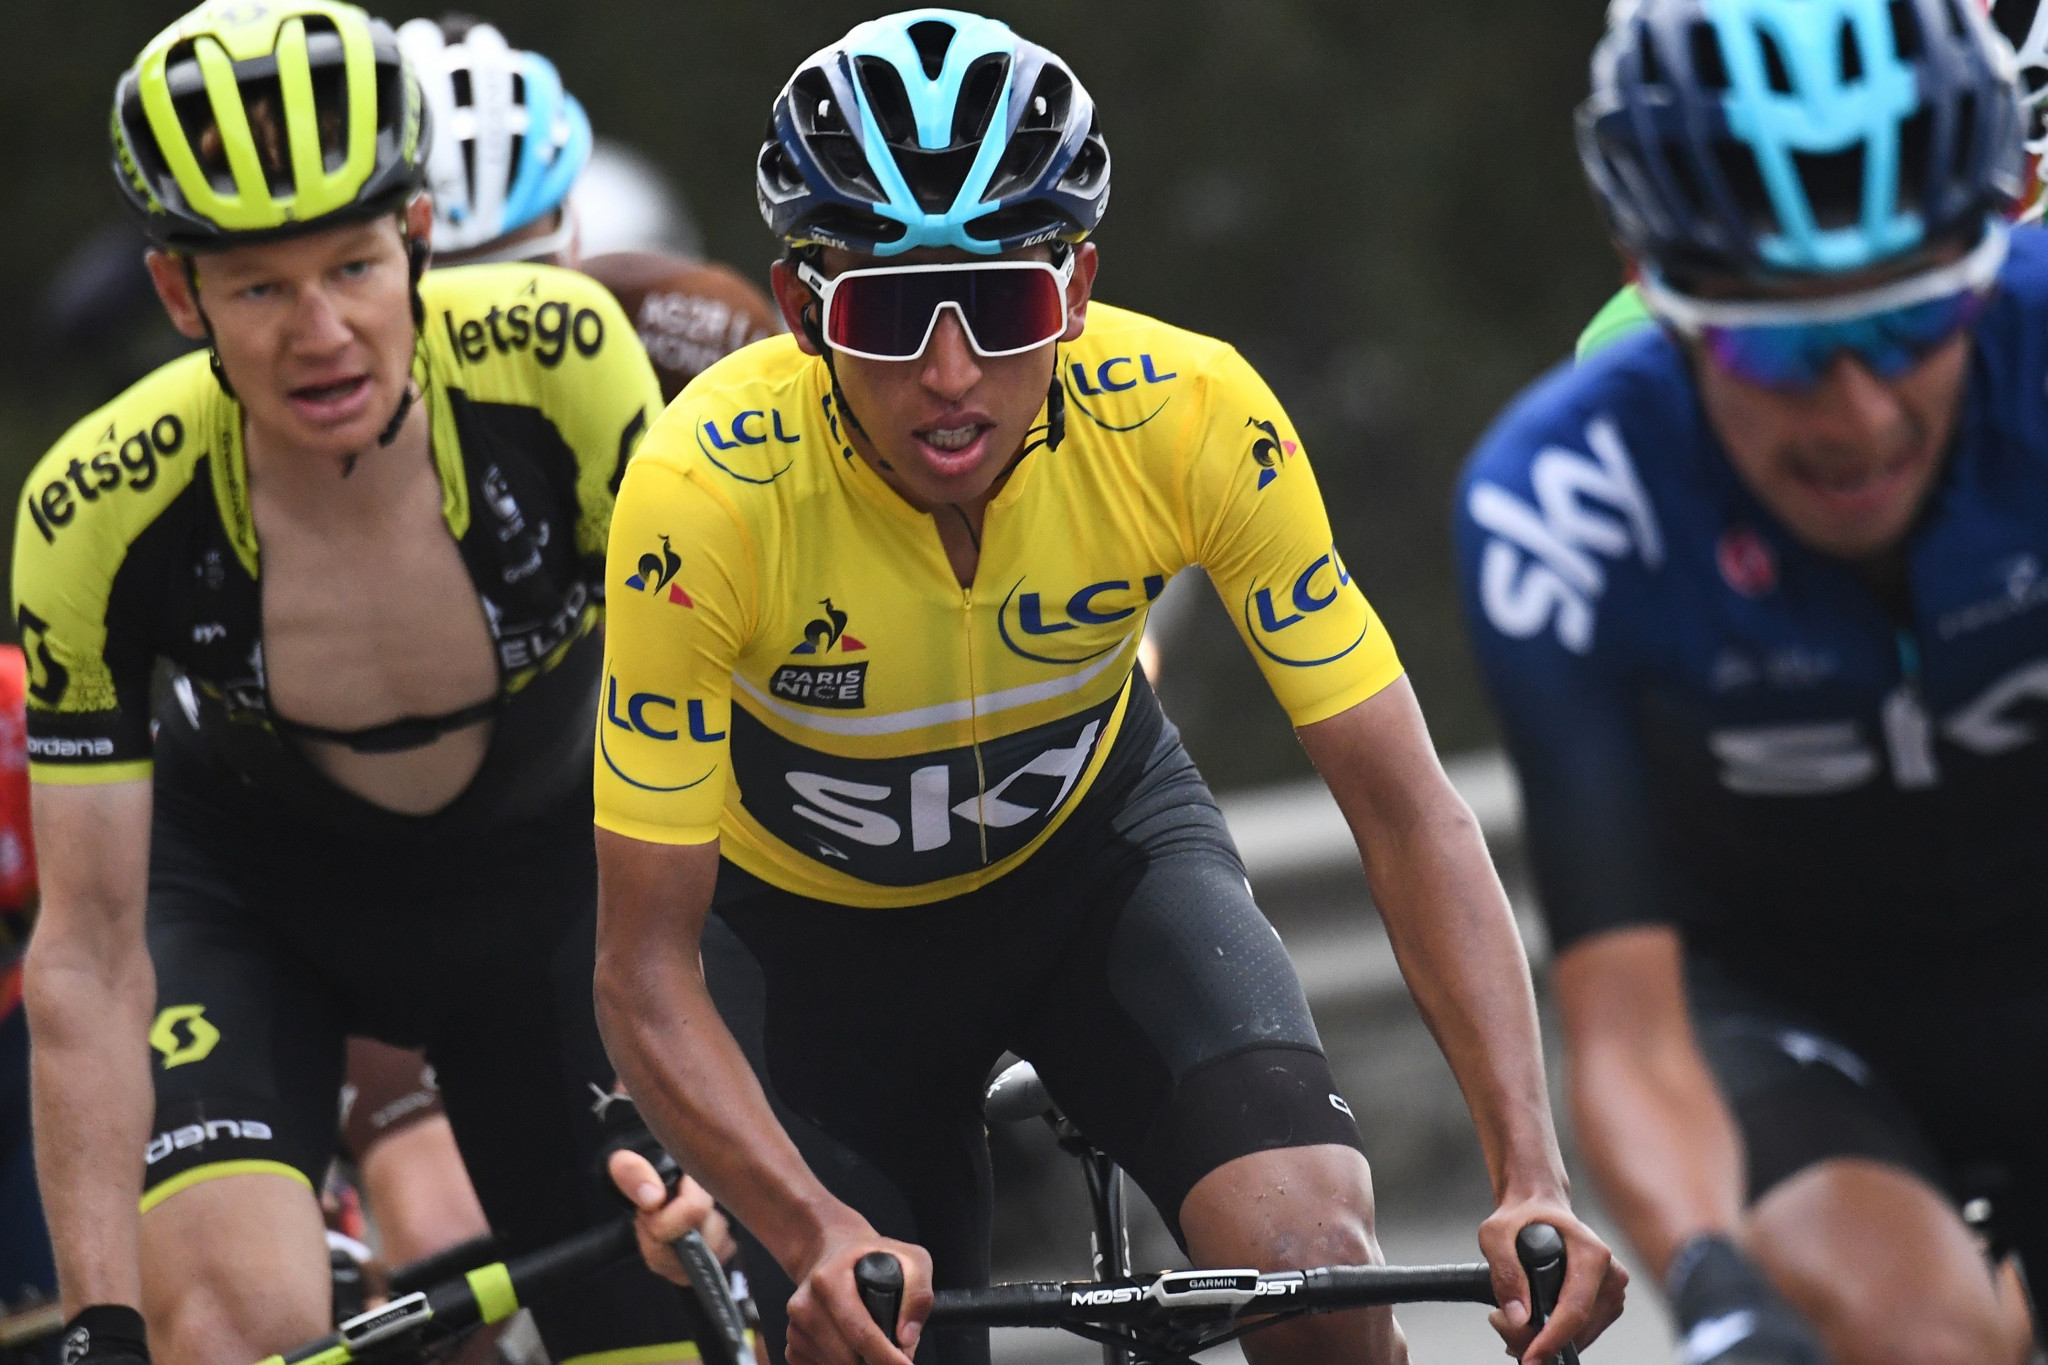 Paris-Nice, won last year by Colombia's Egan Bernal who will not be defending his title, is set to begin tomorrow ©Getty Images